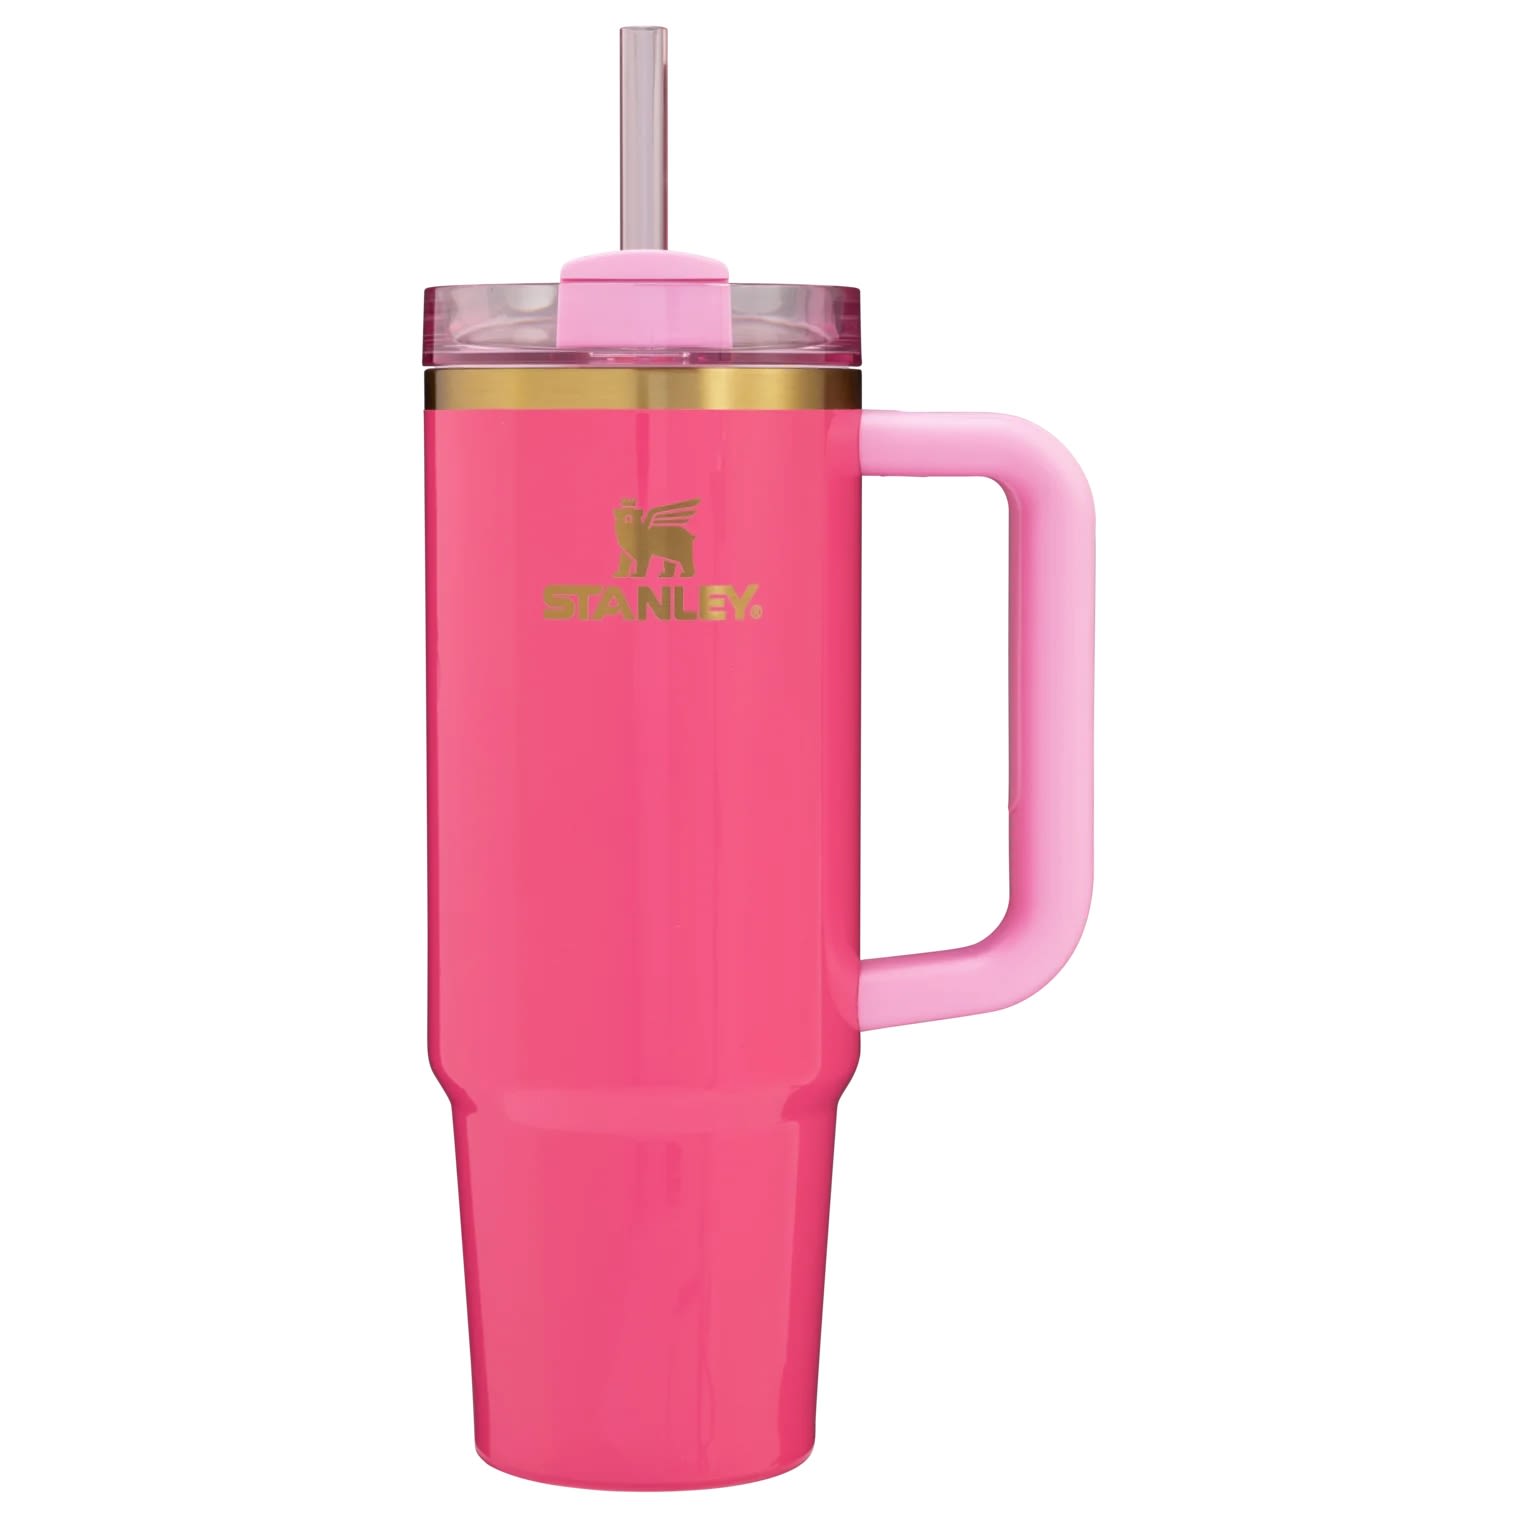 Stanley Restocks Pink Parade Tumbler in Time for Mother’s Day — Here’s Where You Can Buy It